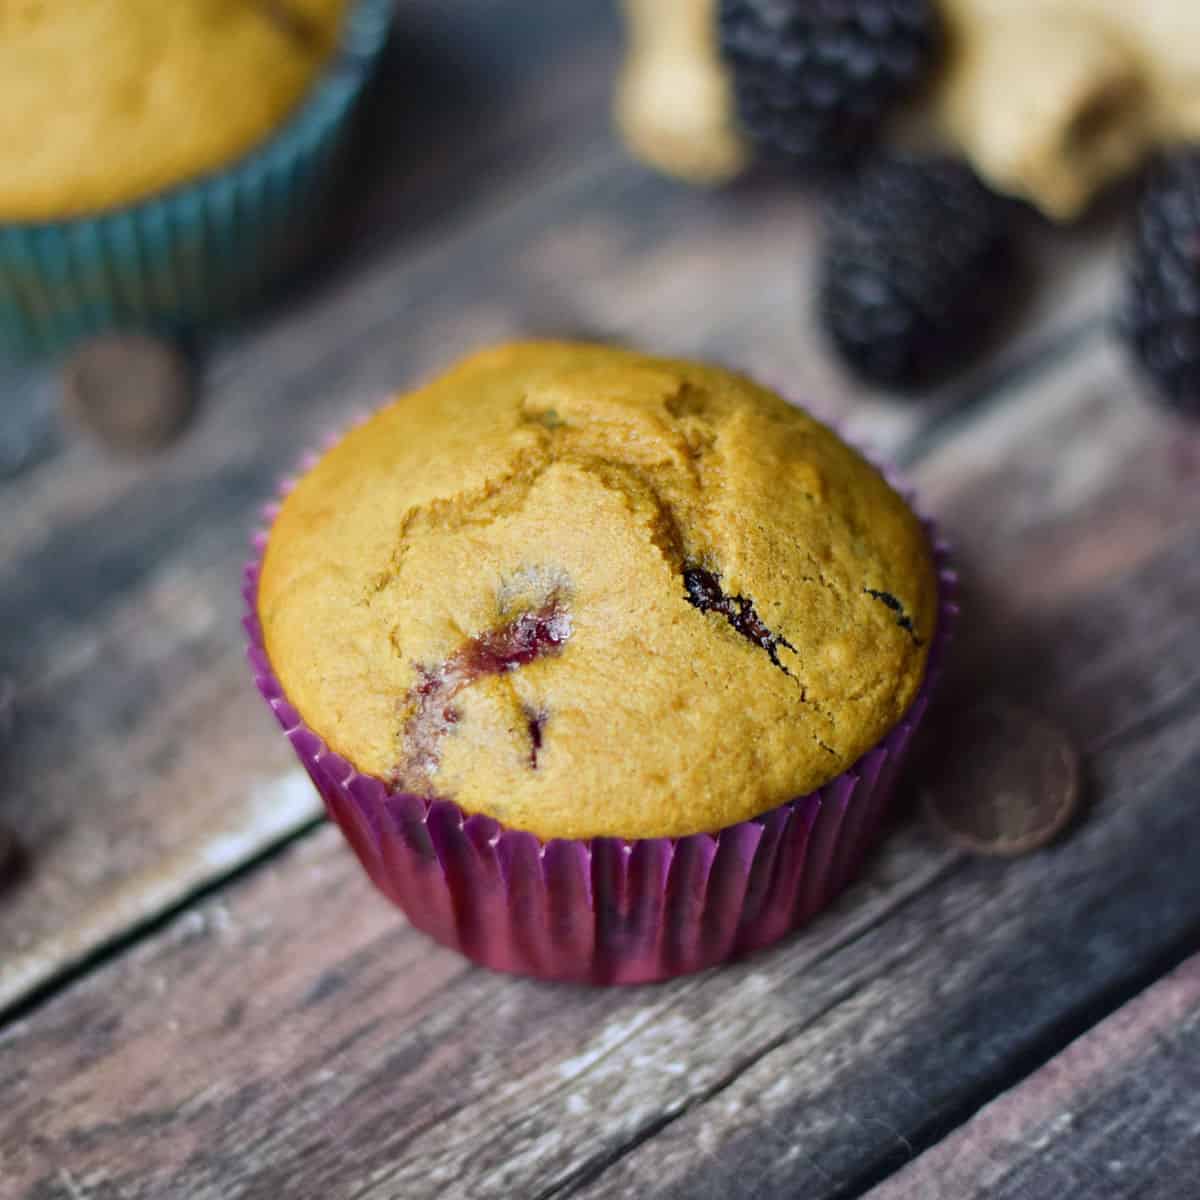 Two blackberry muffins surrounded by fresh blackberries and dark chocolate chips.